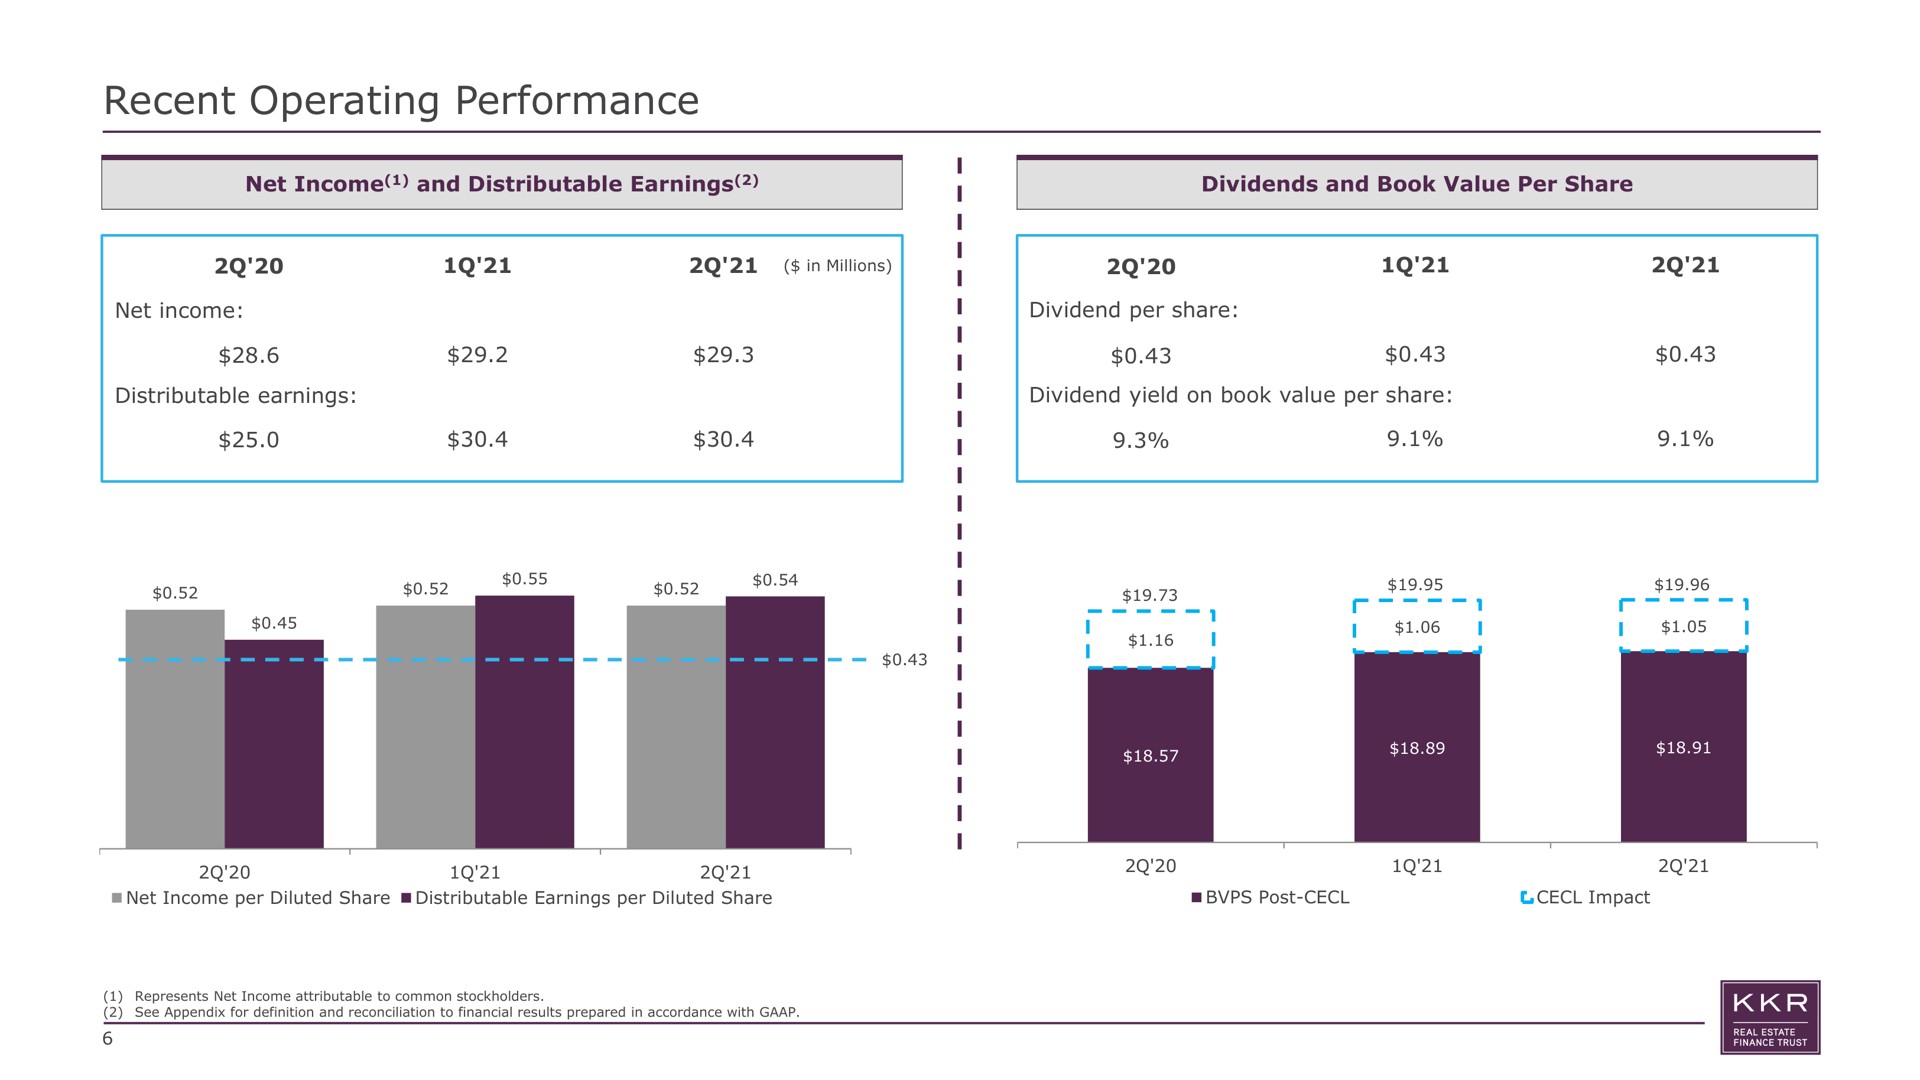 recent operating performance net income distributable earnings dividends and book value per share net income and distributable earnings dividend per share dividend yield on book value per share | KKR Real Estate Finance Trust